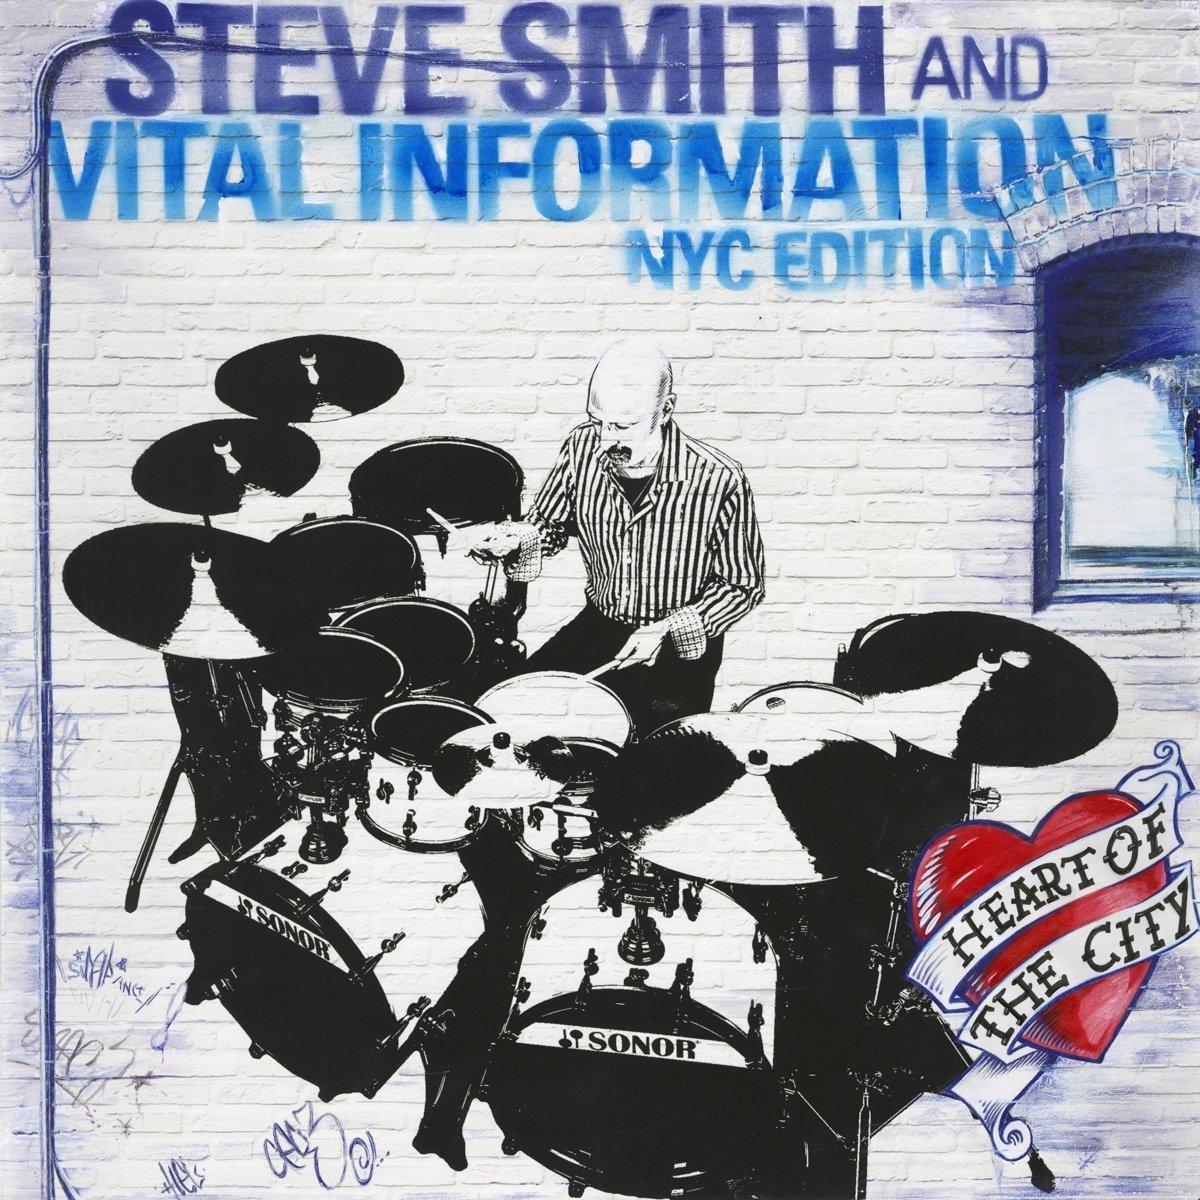 STEVE SMITH - Steve Smith and Vital Information NYC Edition : Heart Of The City cover 